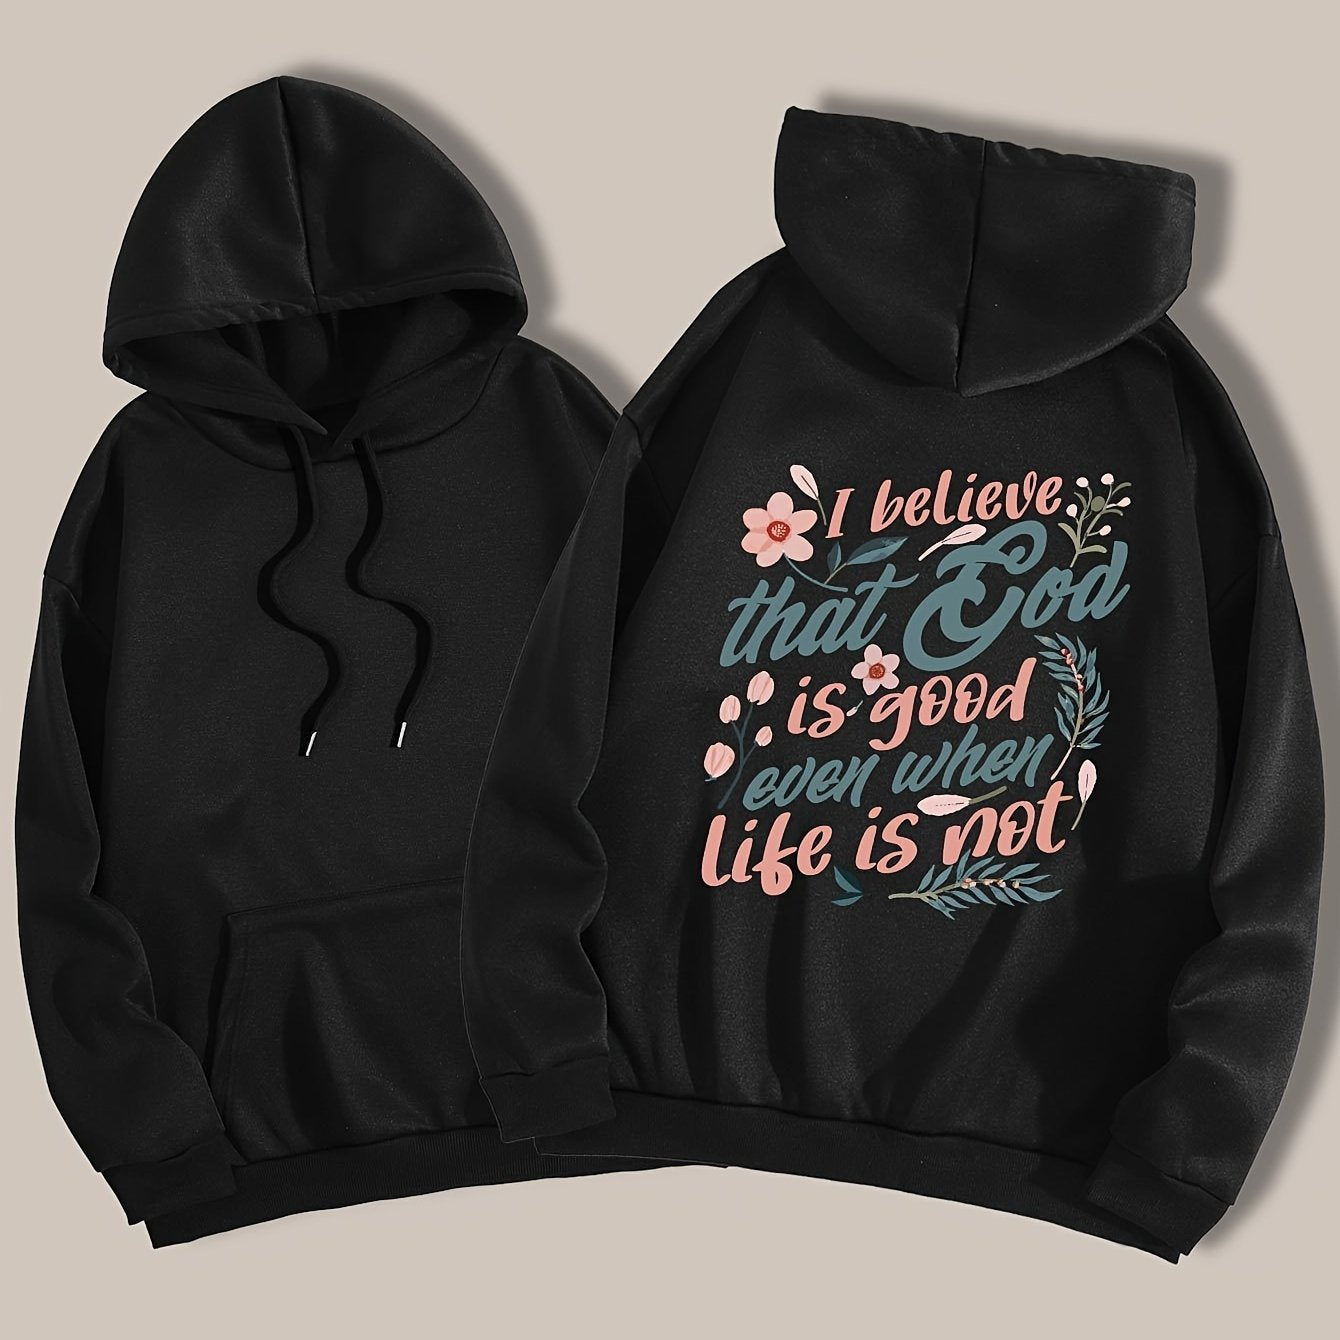 I Believe That God Is Good Even When Life Is Not Plus Size Women's Christian Pullover Hooded Sweatshirt claimedbygoddesigns